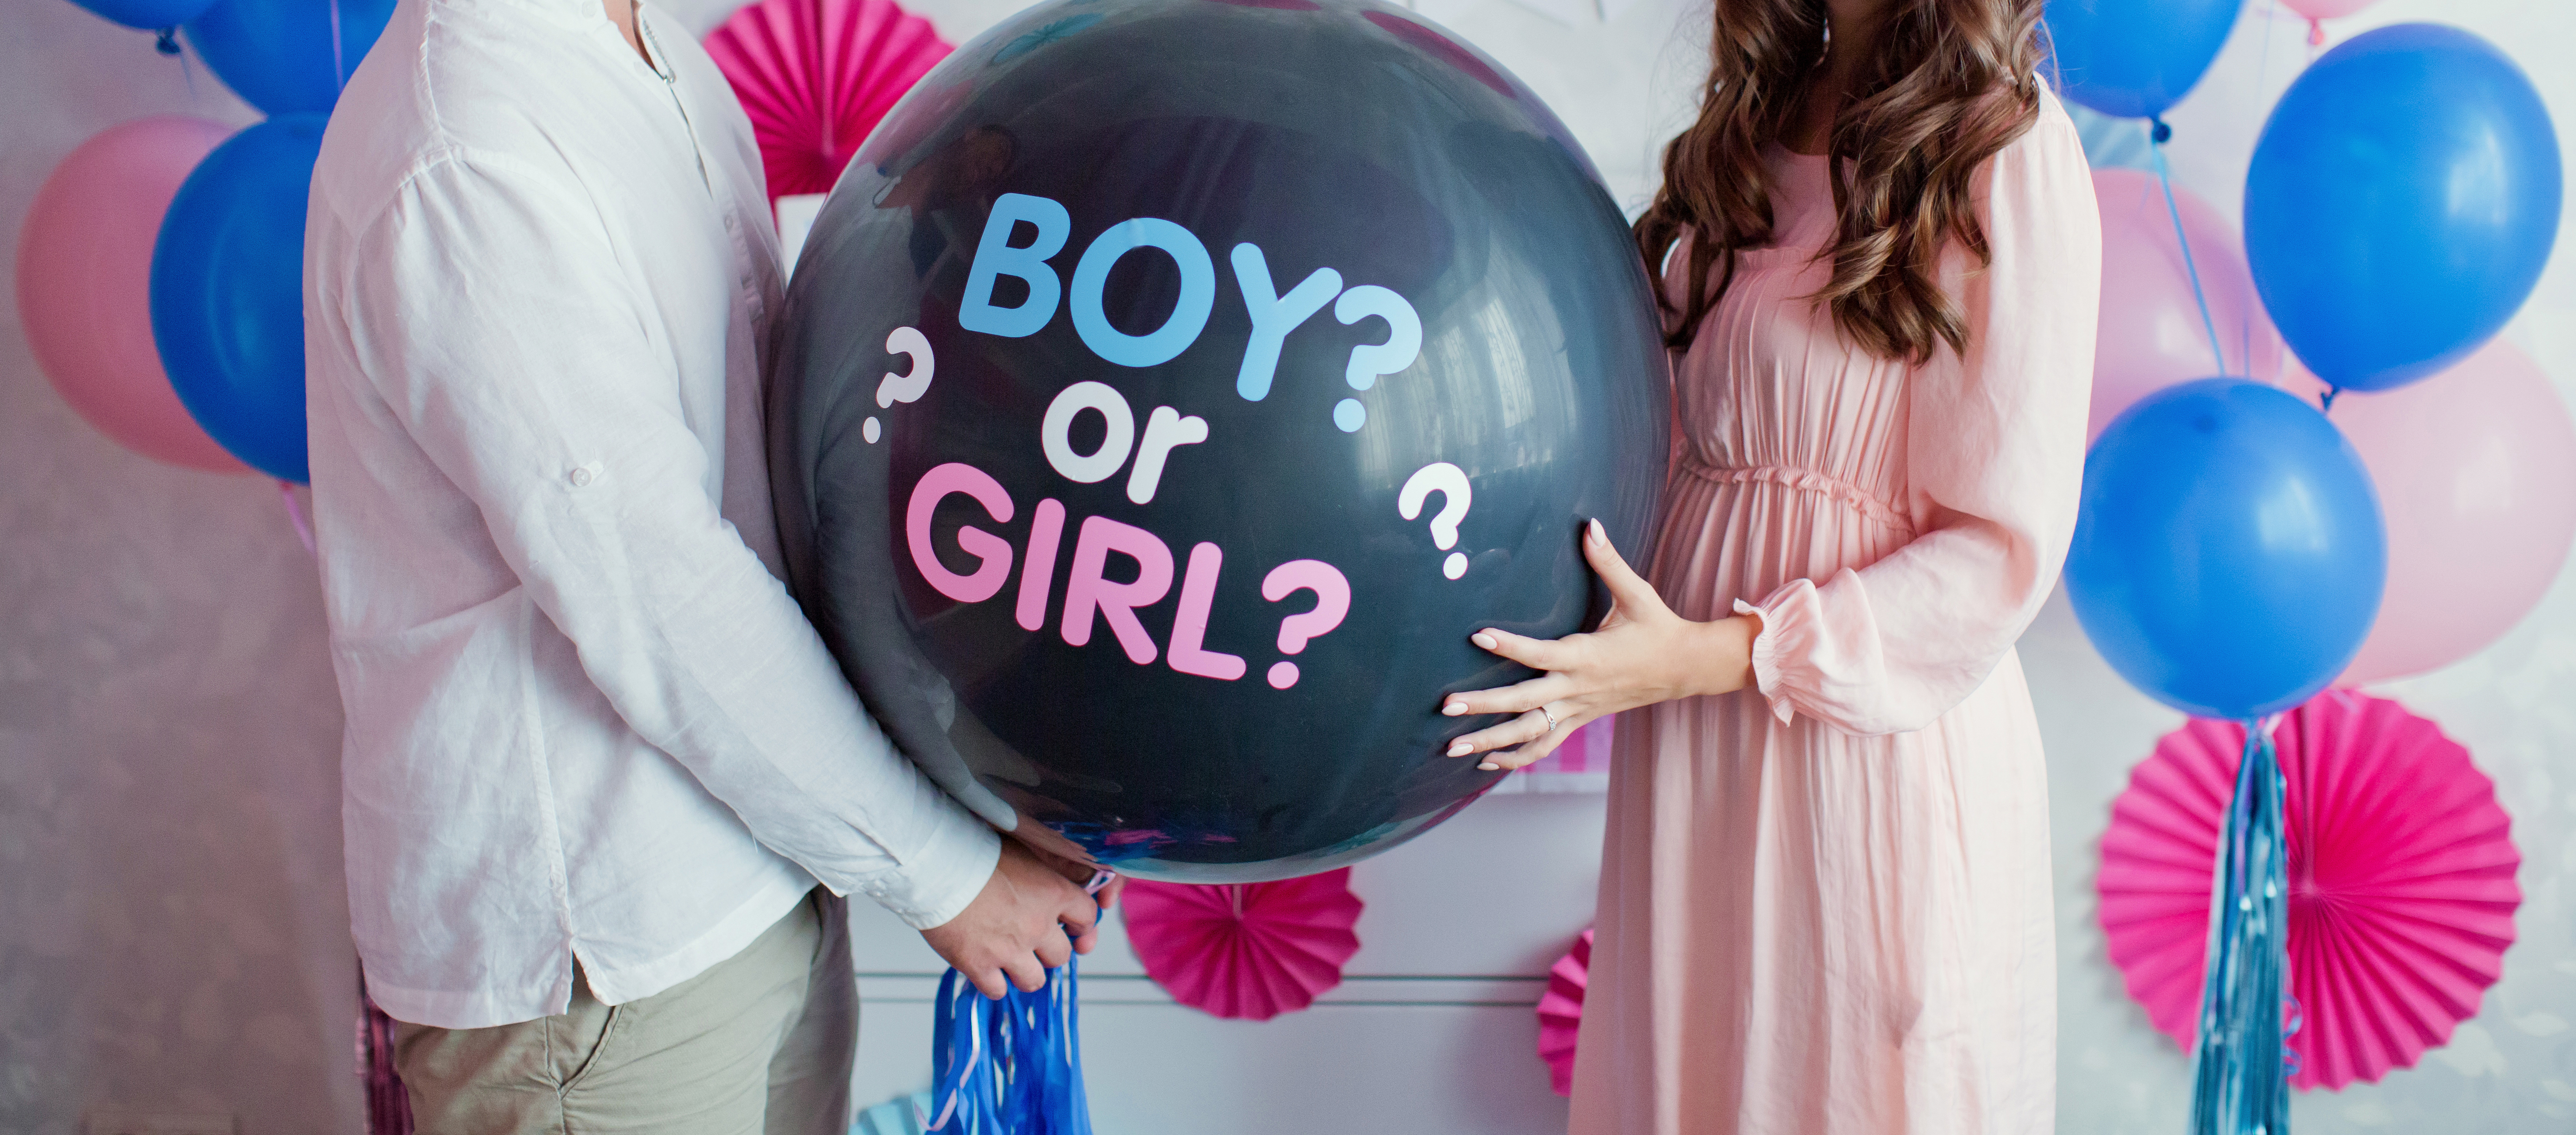 A couple holding a boy and girl balloon | Source: Shutterstock